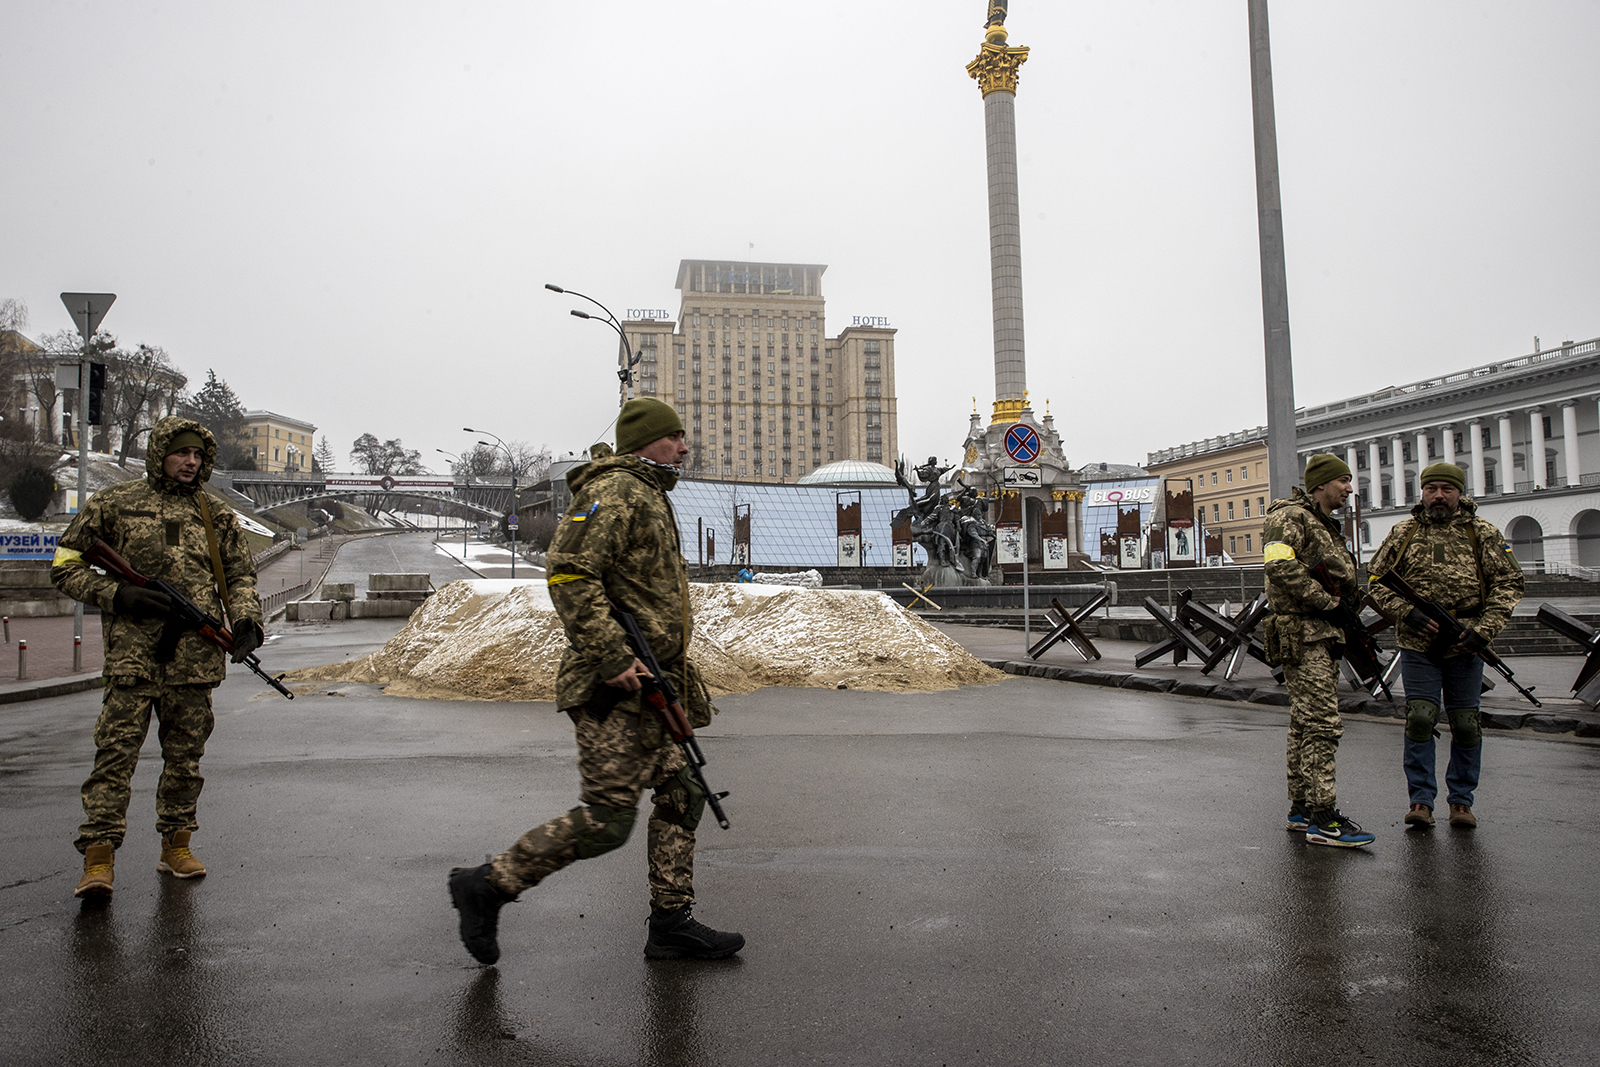 Soldiers are seen around piles of sand used for blocking a road in the Ukrainian capital of Kyiv on March 2.